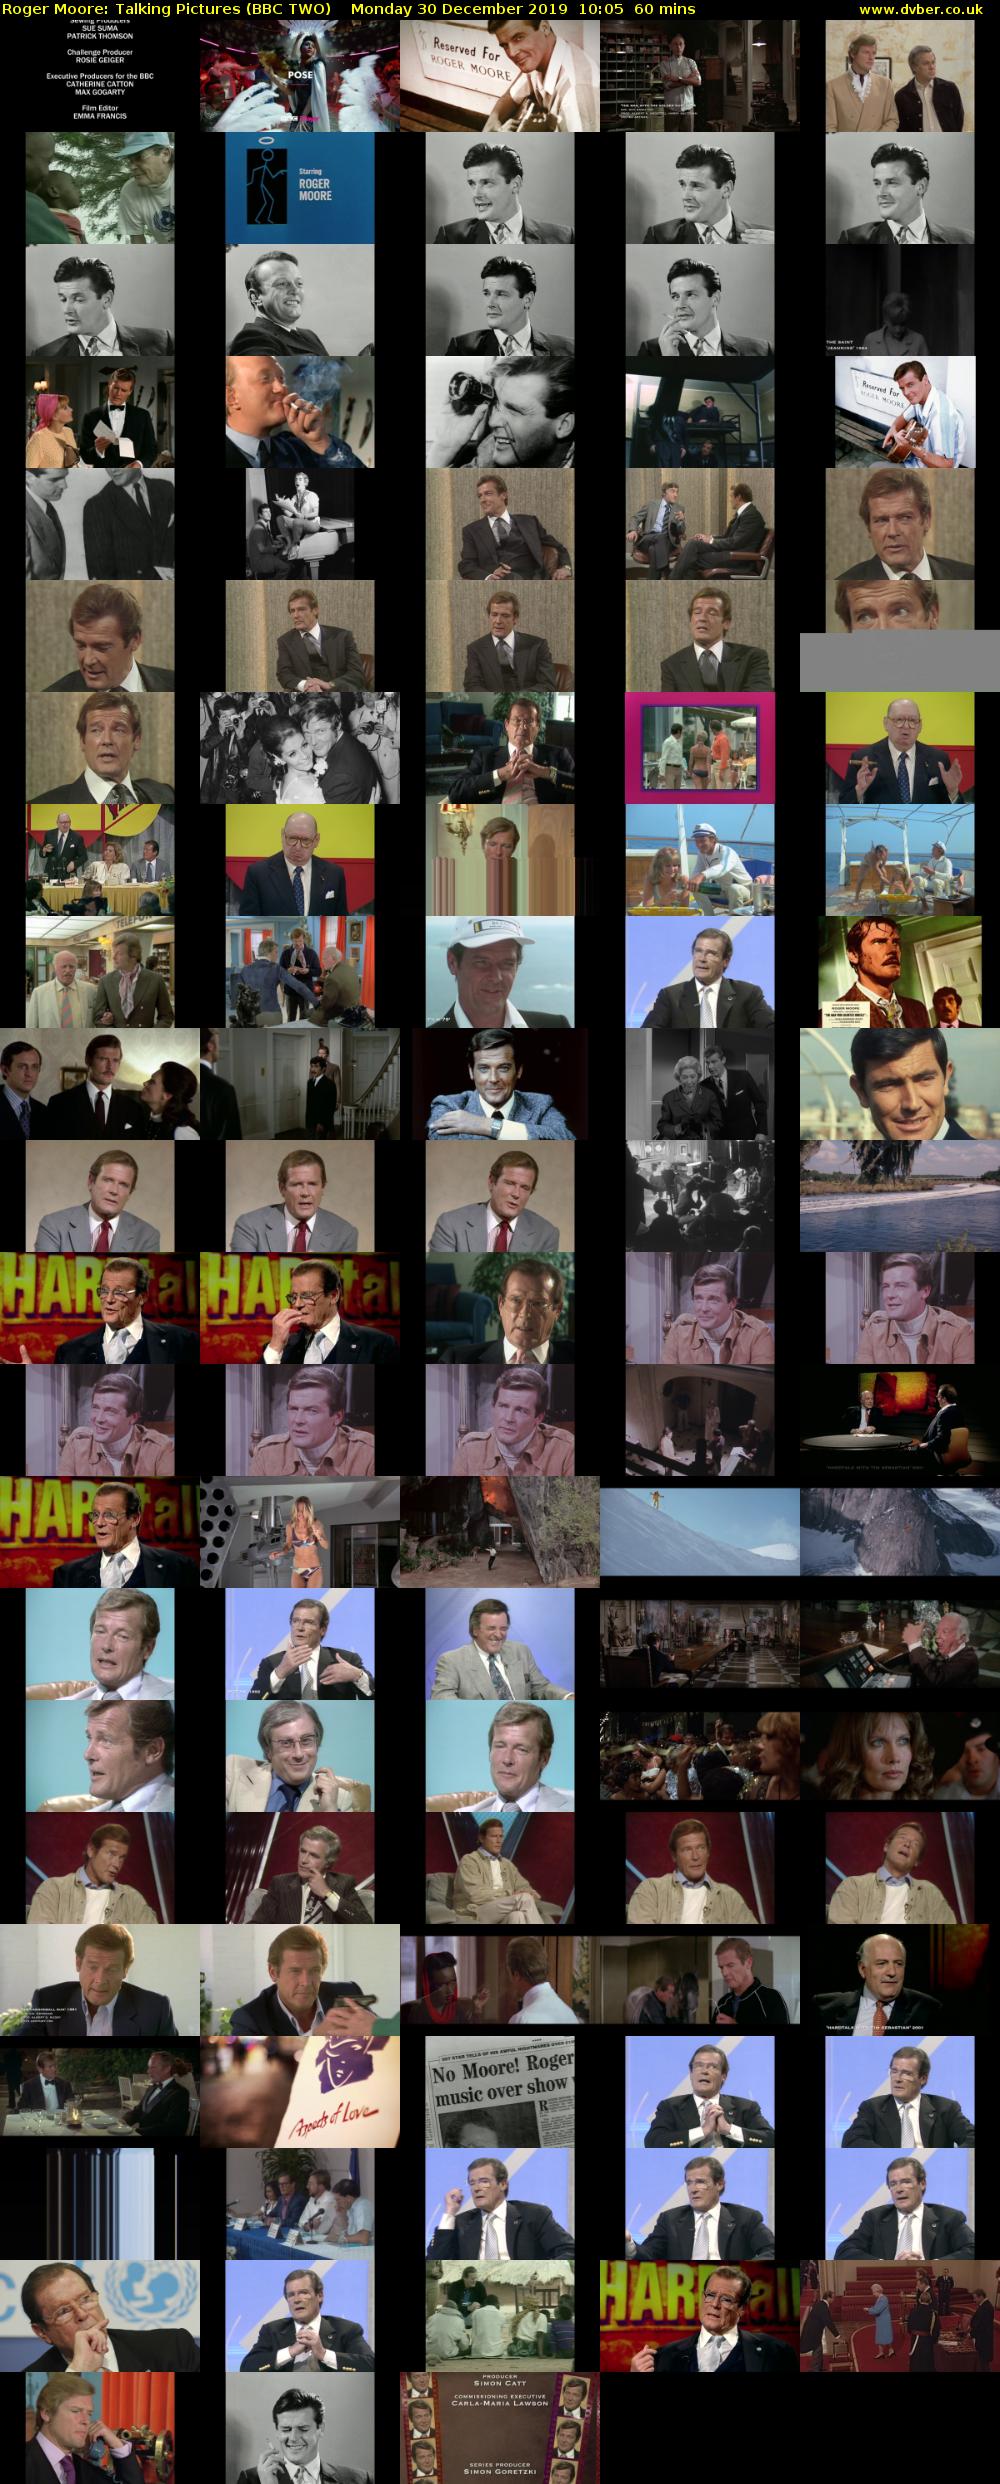 Roger Moore: Talking Pictures (BBC TWO) Monday 30 December 2019 10:05 - 11:05